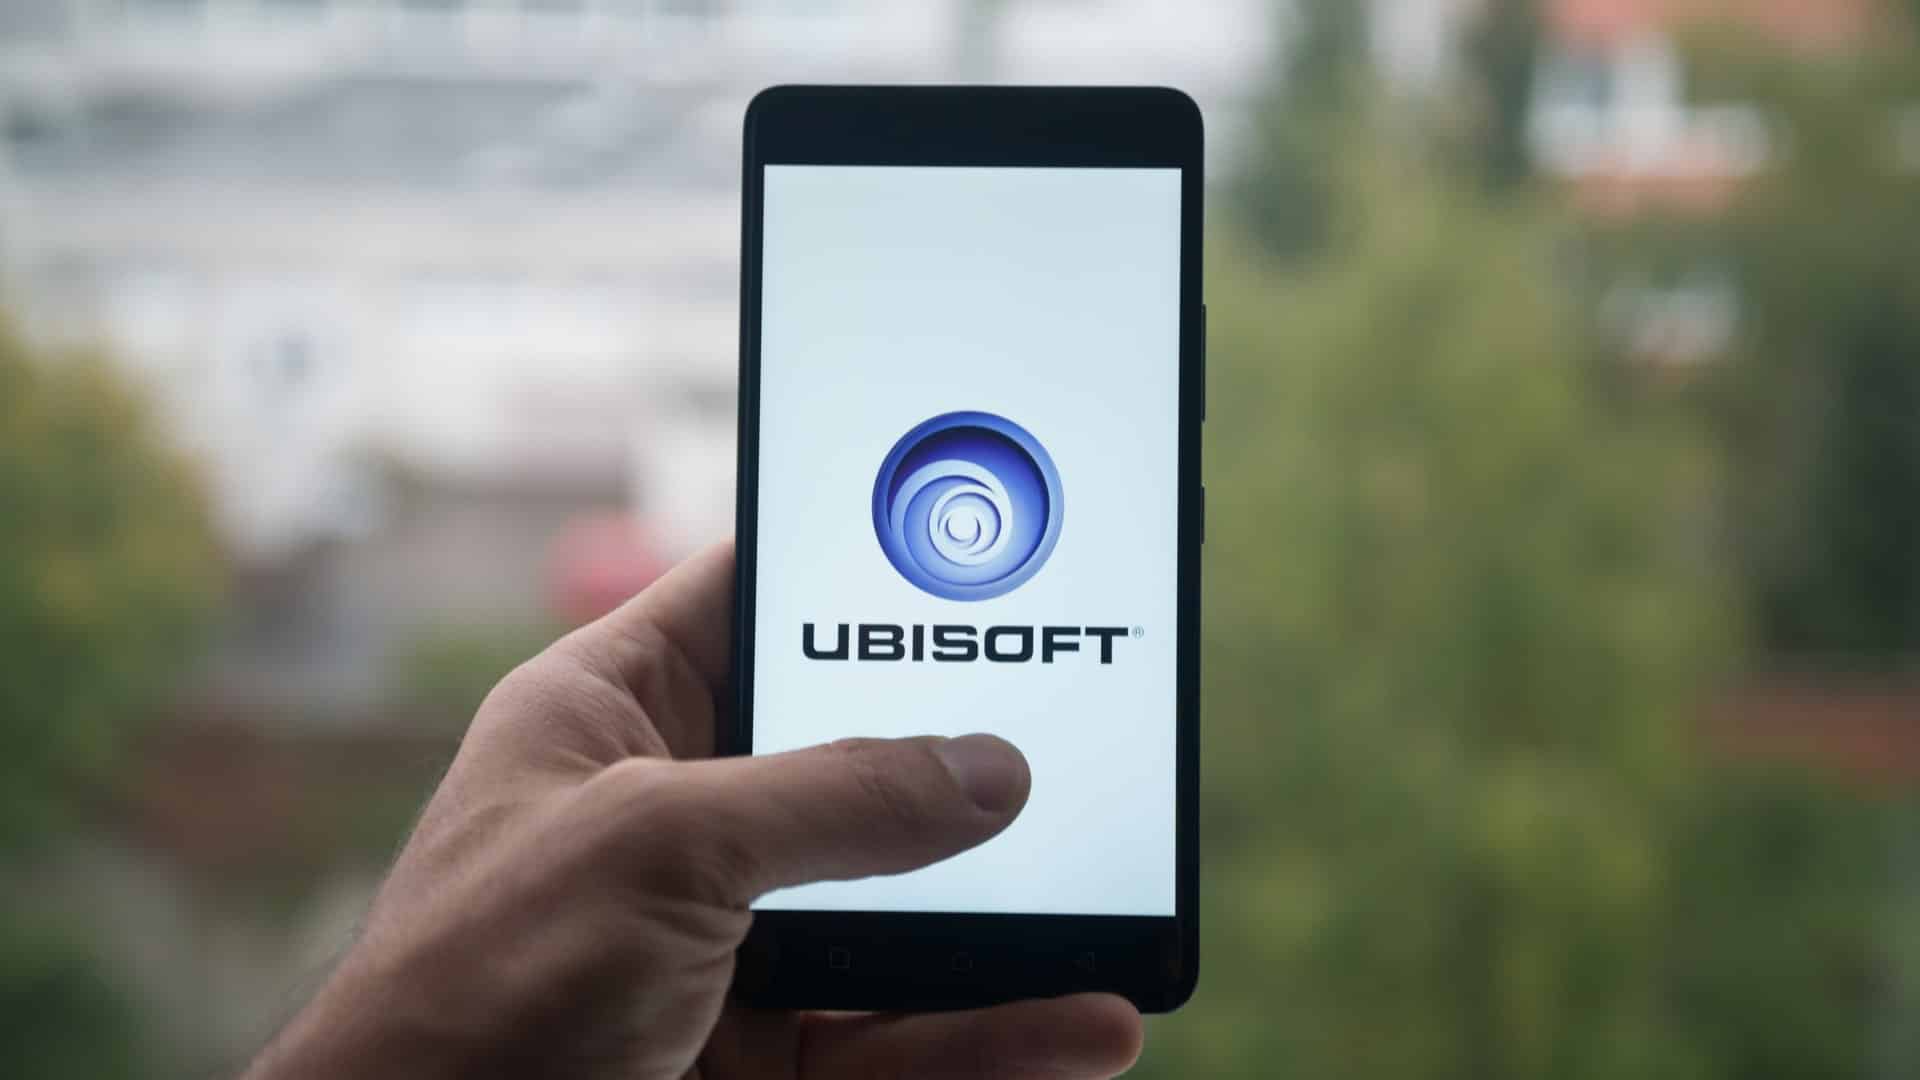 Gaming giant Ubisoft enters the world of cryptocurrencies